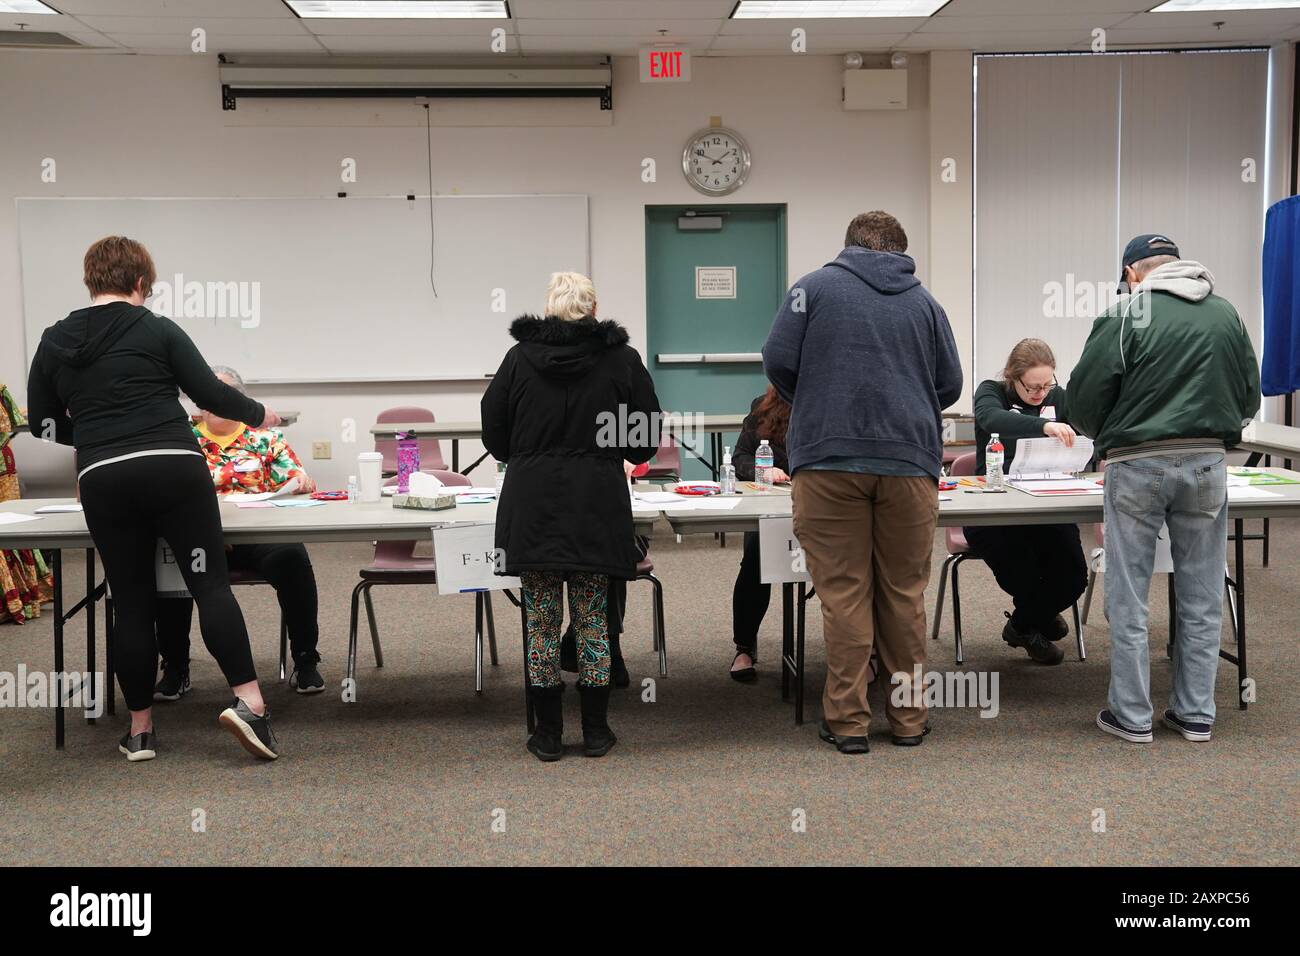 (200212) -- MANCHESTER (U.S.), Feb. 12, 2020 (Xinhua) -- Voters register at a polling station during the New Hampshire primary in Manchester, New Hampshire, the United States, on Feb. 11, 2020. The New Hampshire Democratic primary is in the national limelight as a tight race and two dropouts have defined the 'starting gun' voting. (Xinhua/Liu Jie) Stock Photo